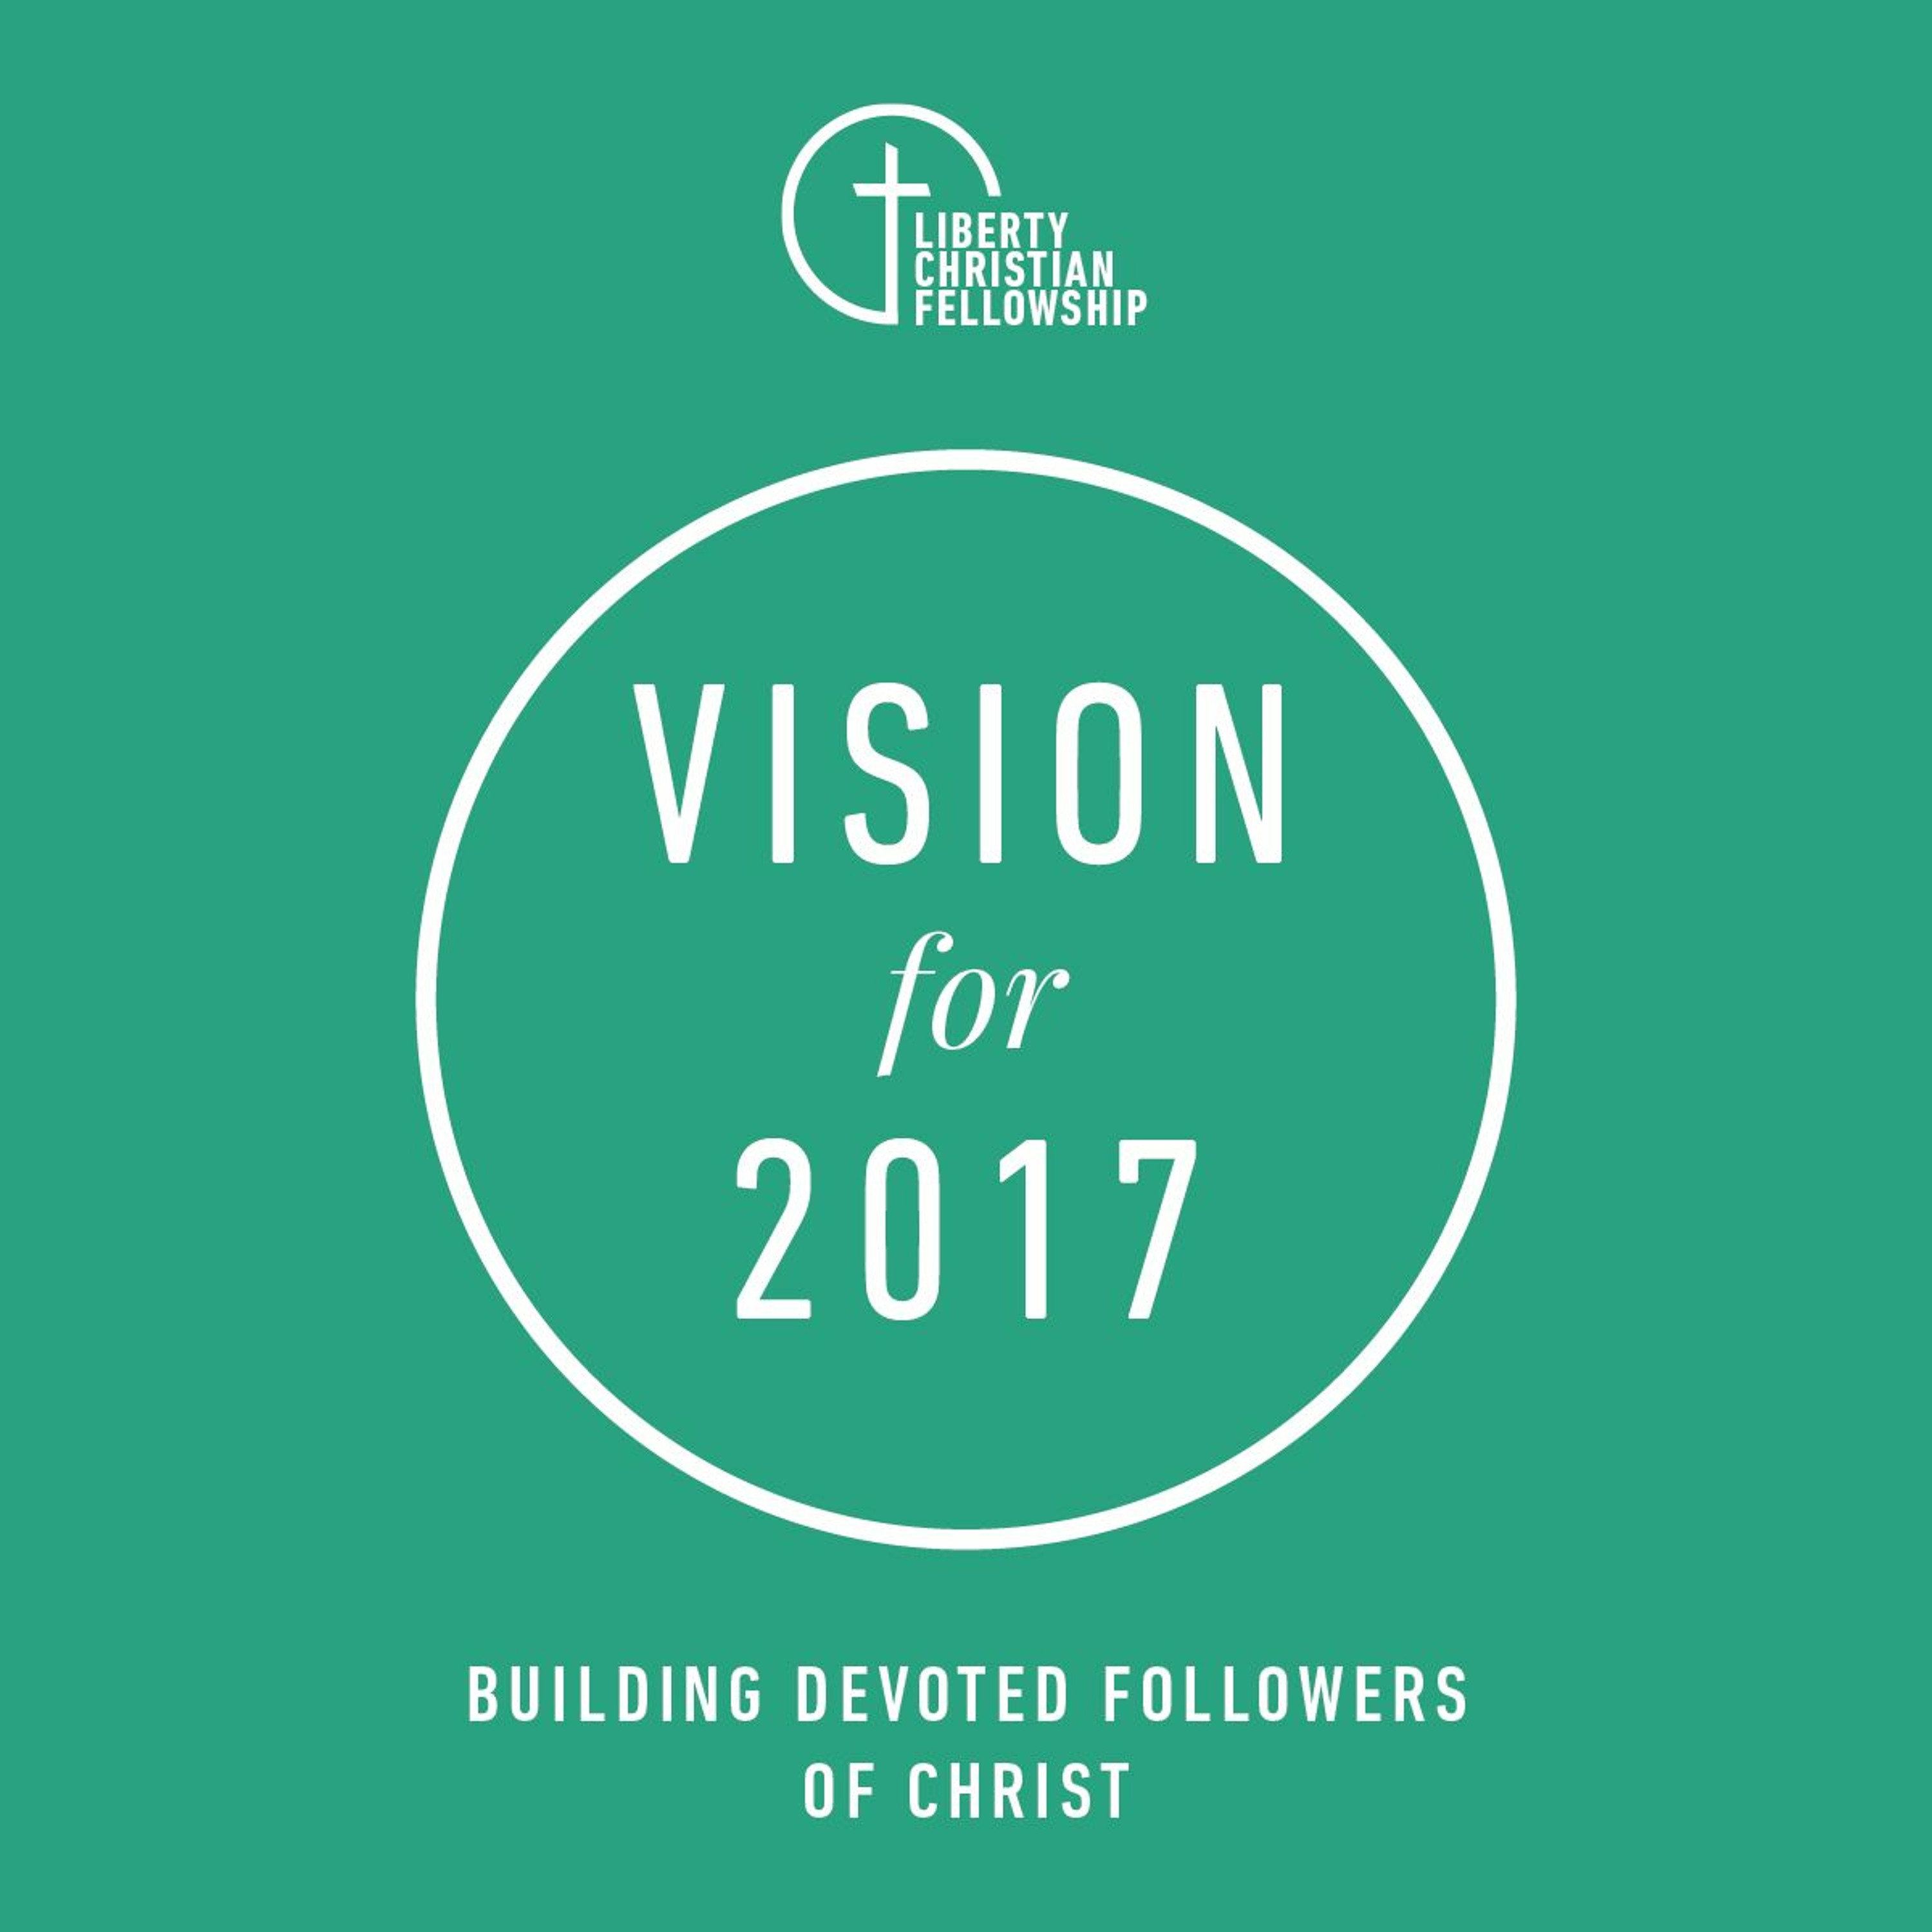 LCF Vision for 2017